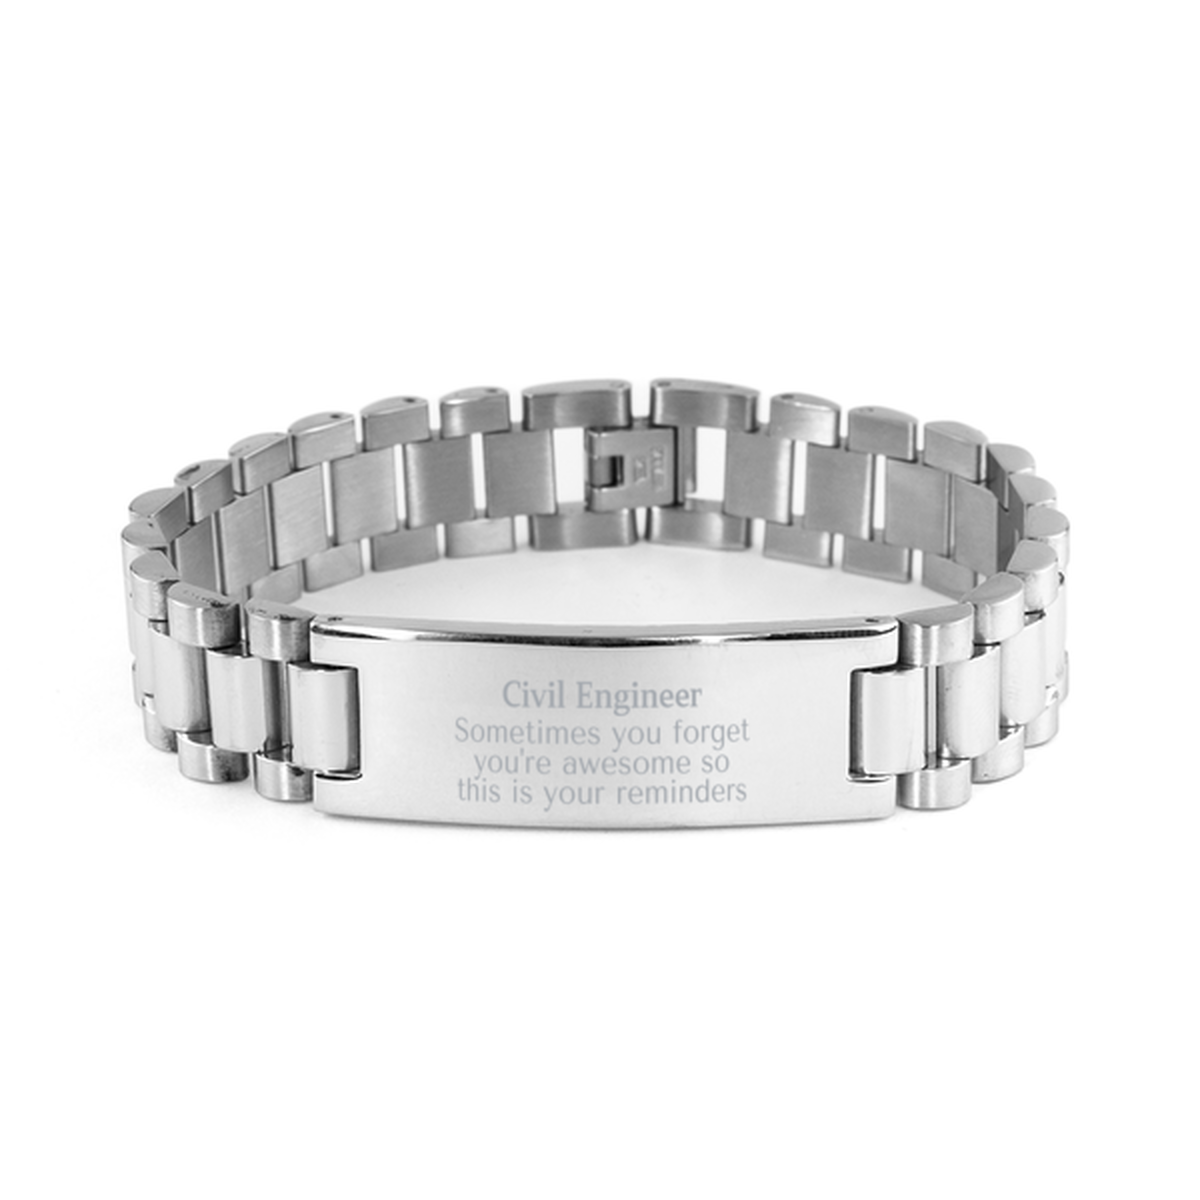 Sentimental Civil Engineer Ladder Stainless Steel Bracelet, Civil Engineer Sometimes you forget you're awesome so this is your reminders, Graduation Christmas Birthday Gifts for Civil Engineer, Men, Women, Coworkers